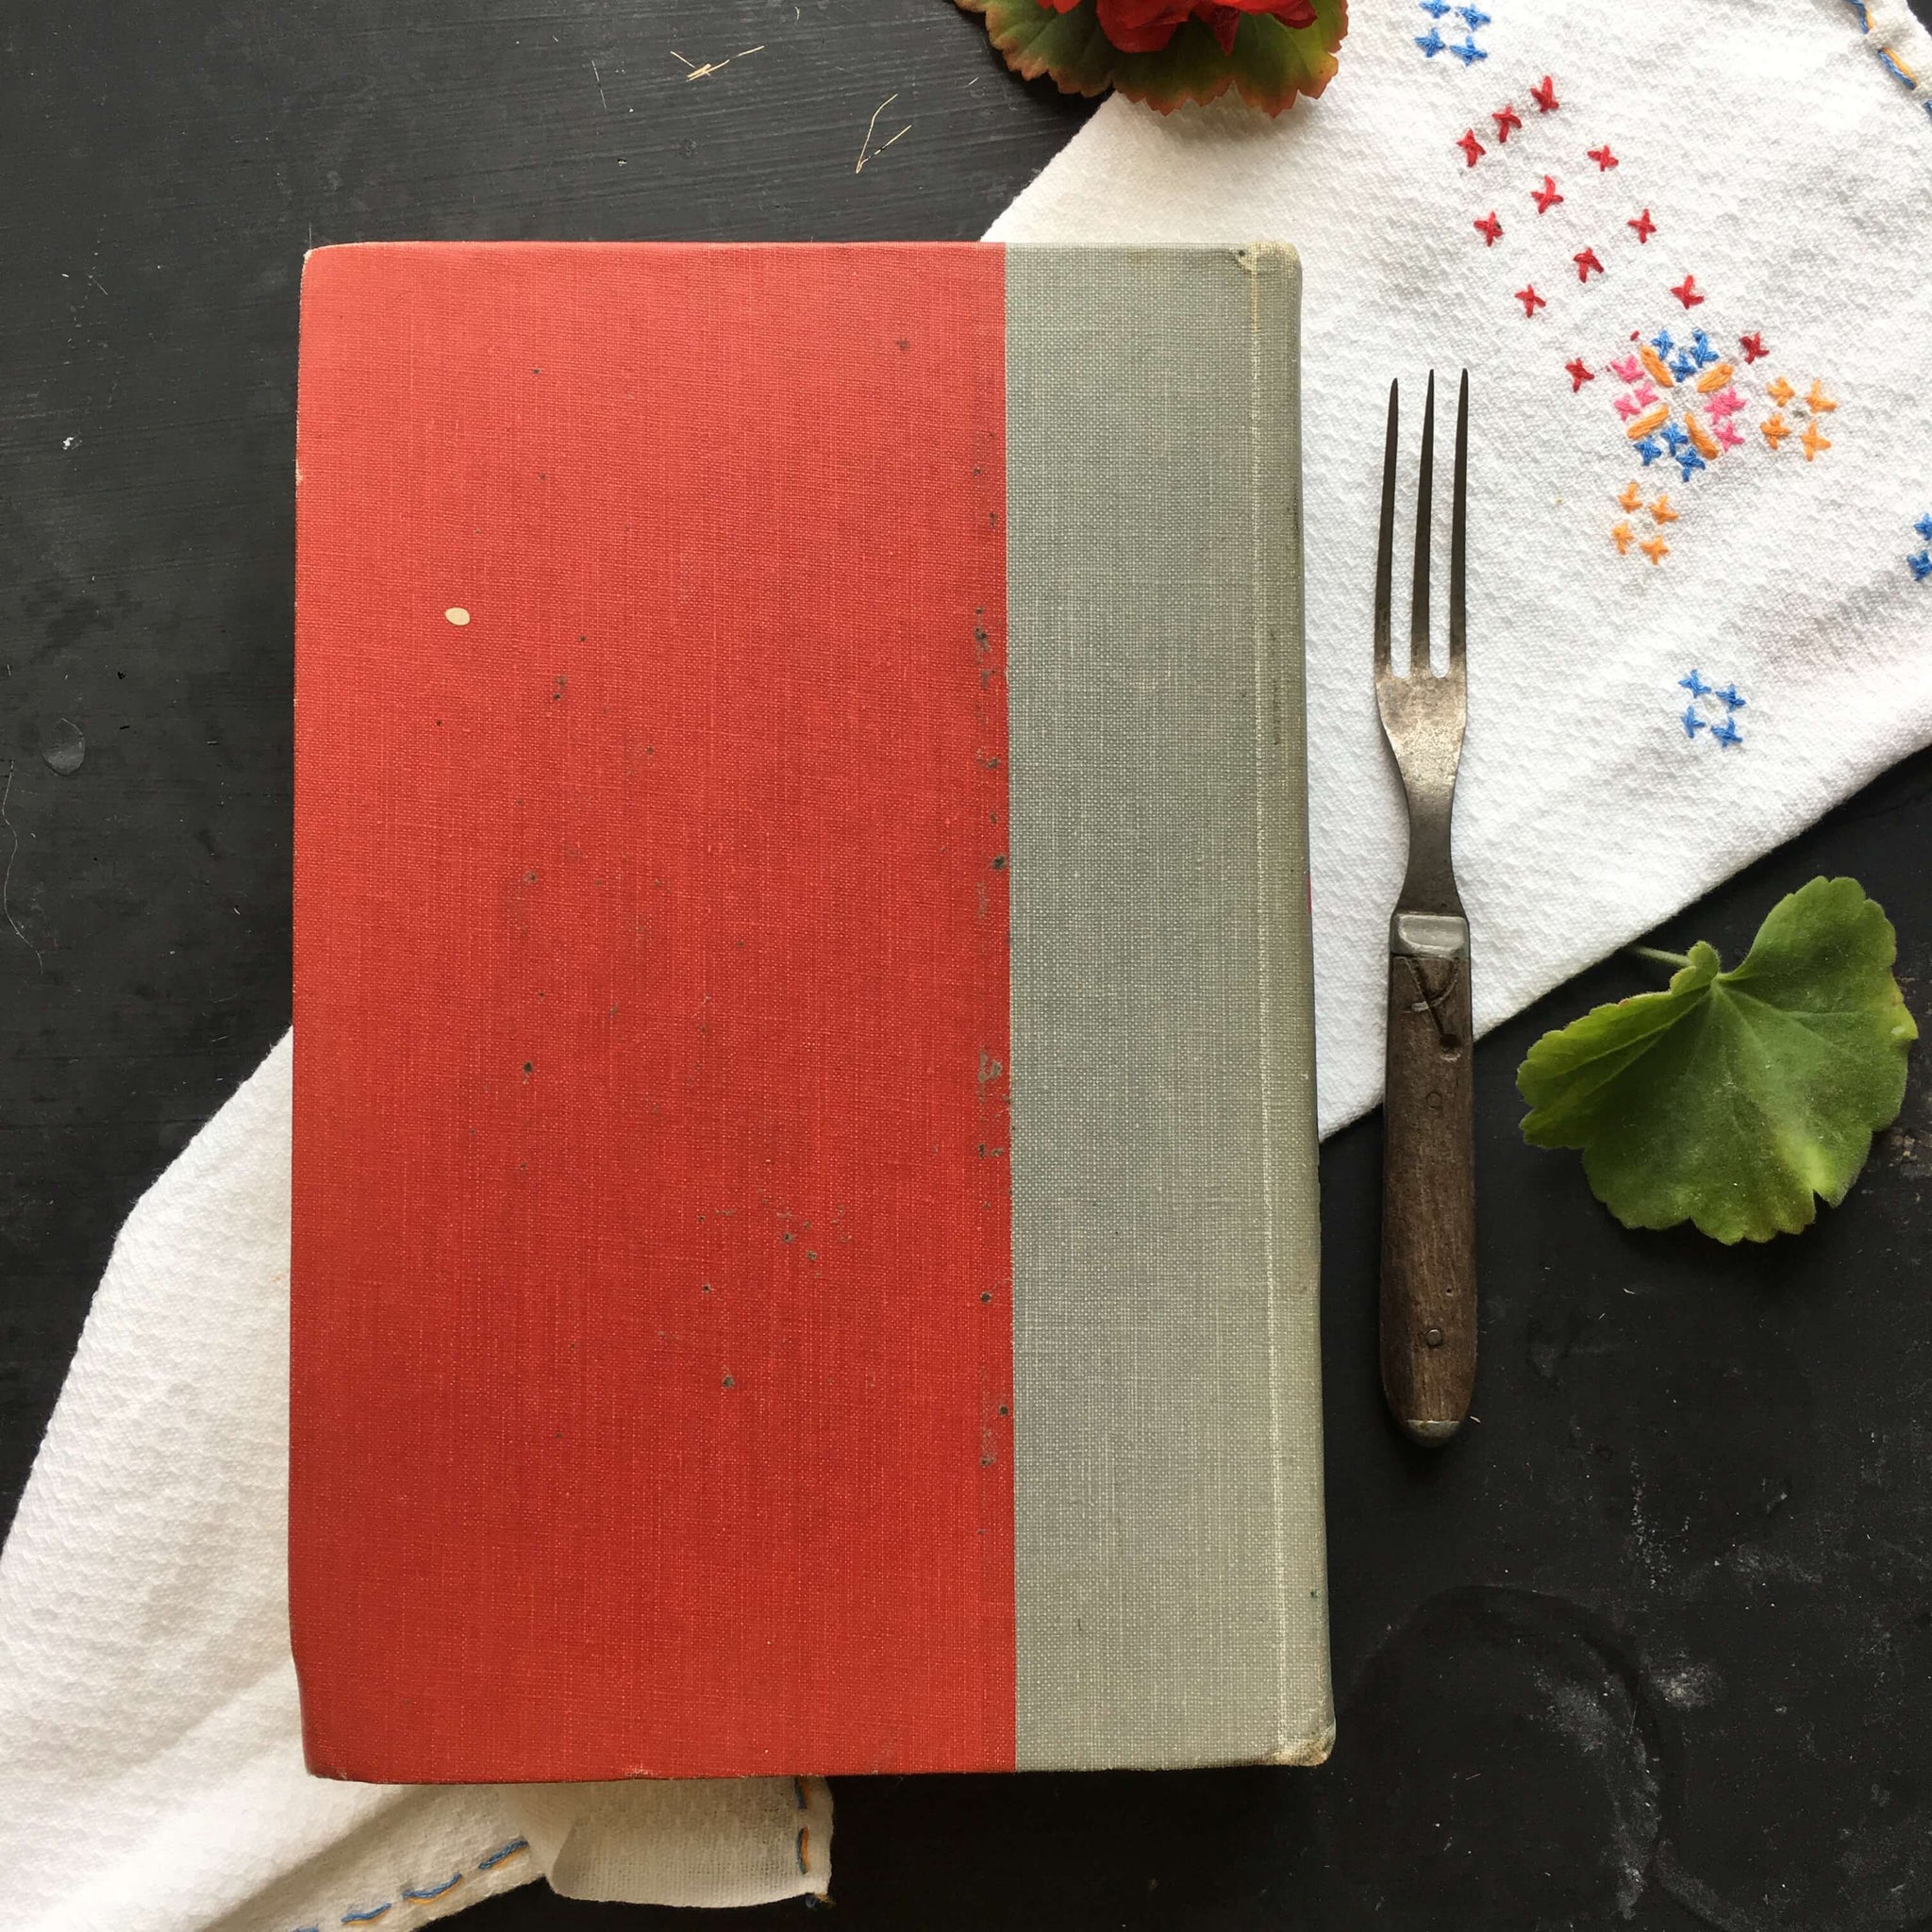 Farm Journal's Country Cookbook - 1959 Edition - Country Farmhouse Recipes